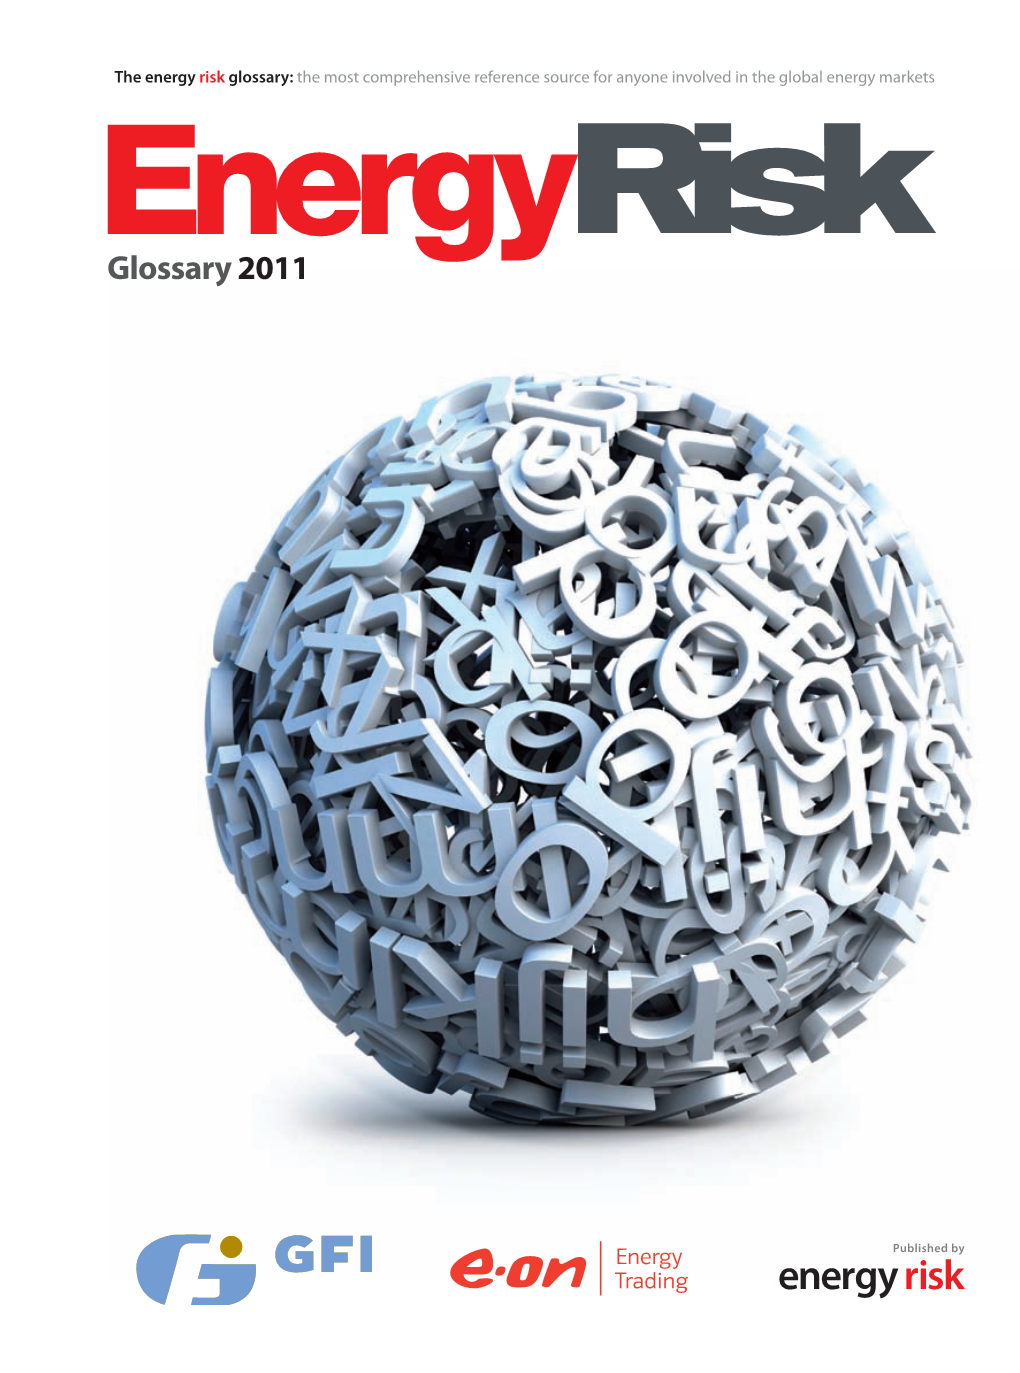 Energy Risk Glossary: the Most Comprehensive Reference Source for Anyone Involved in the Global Energy Markets